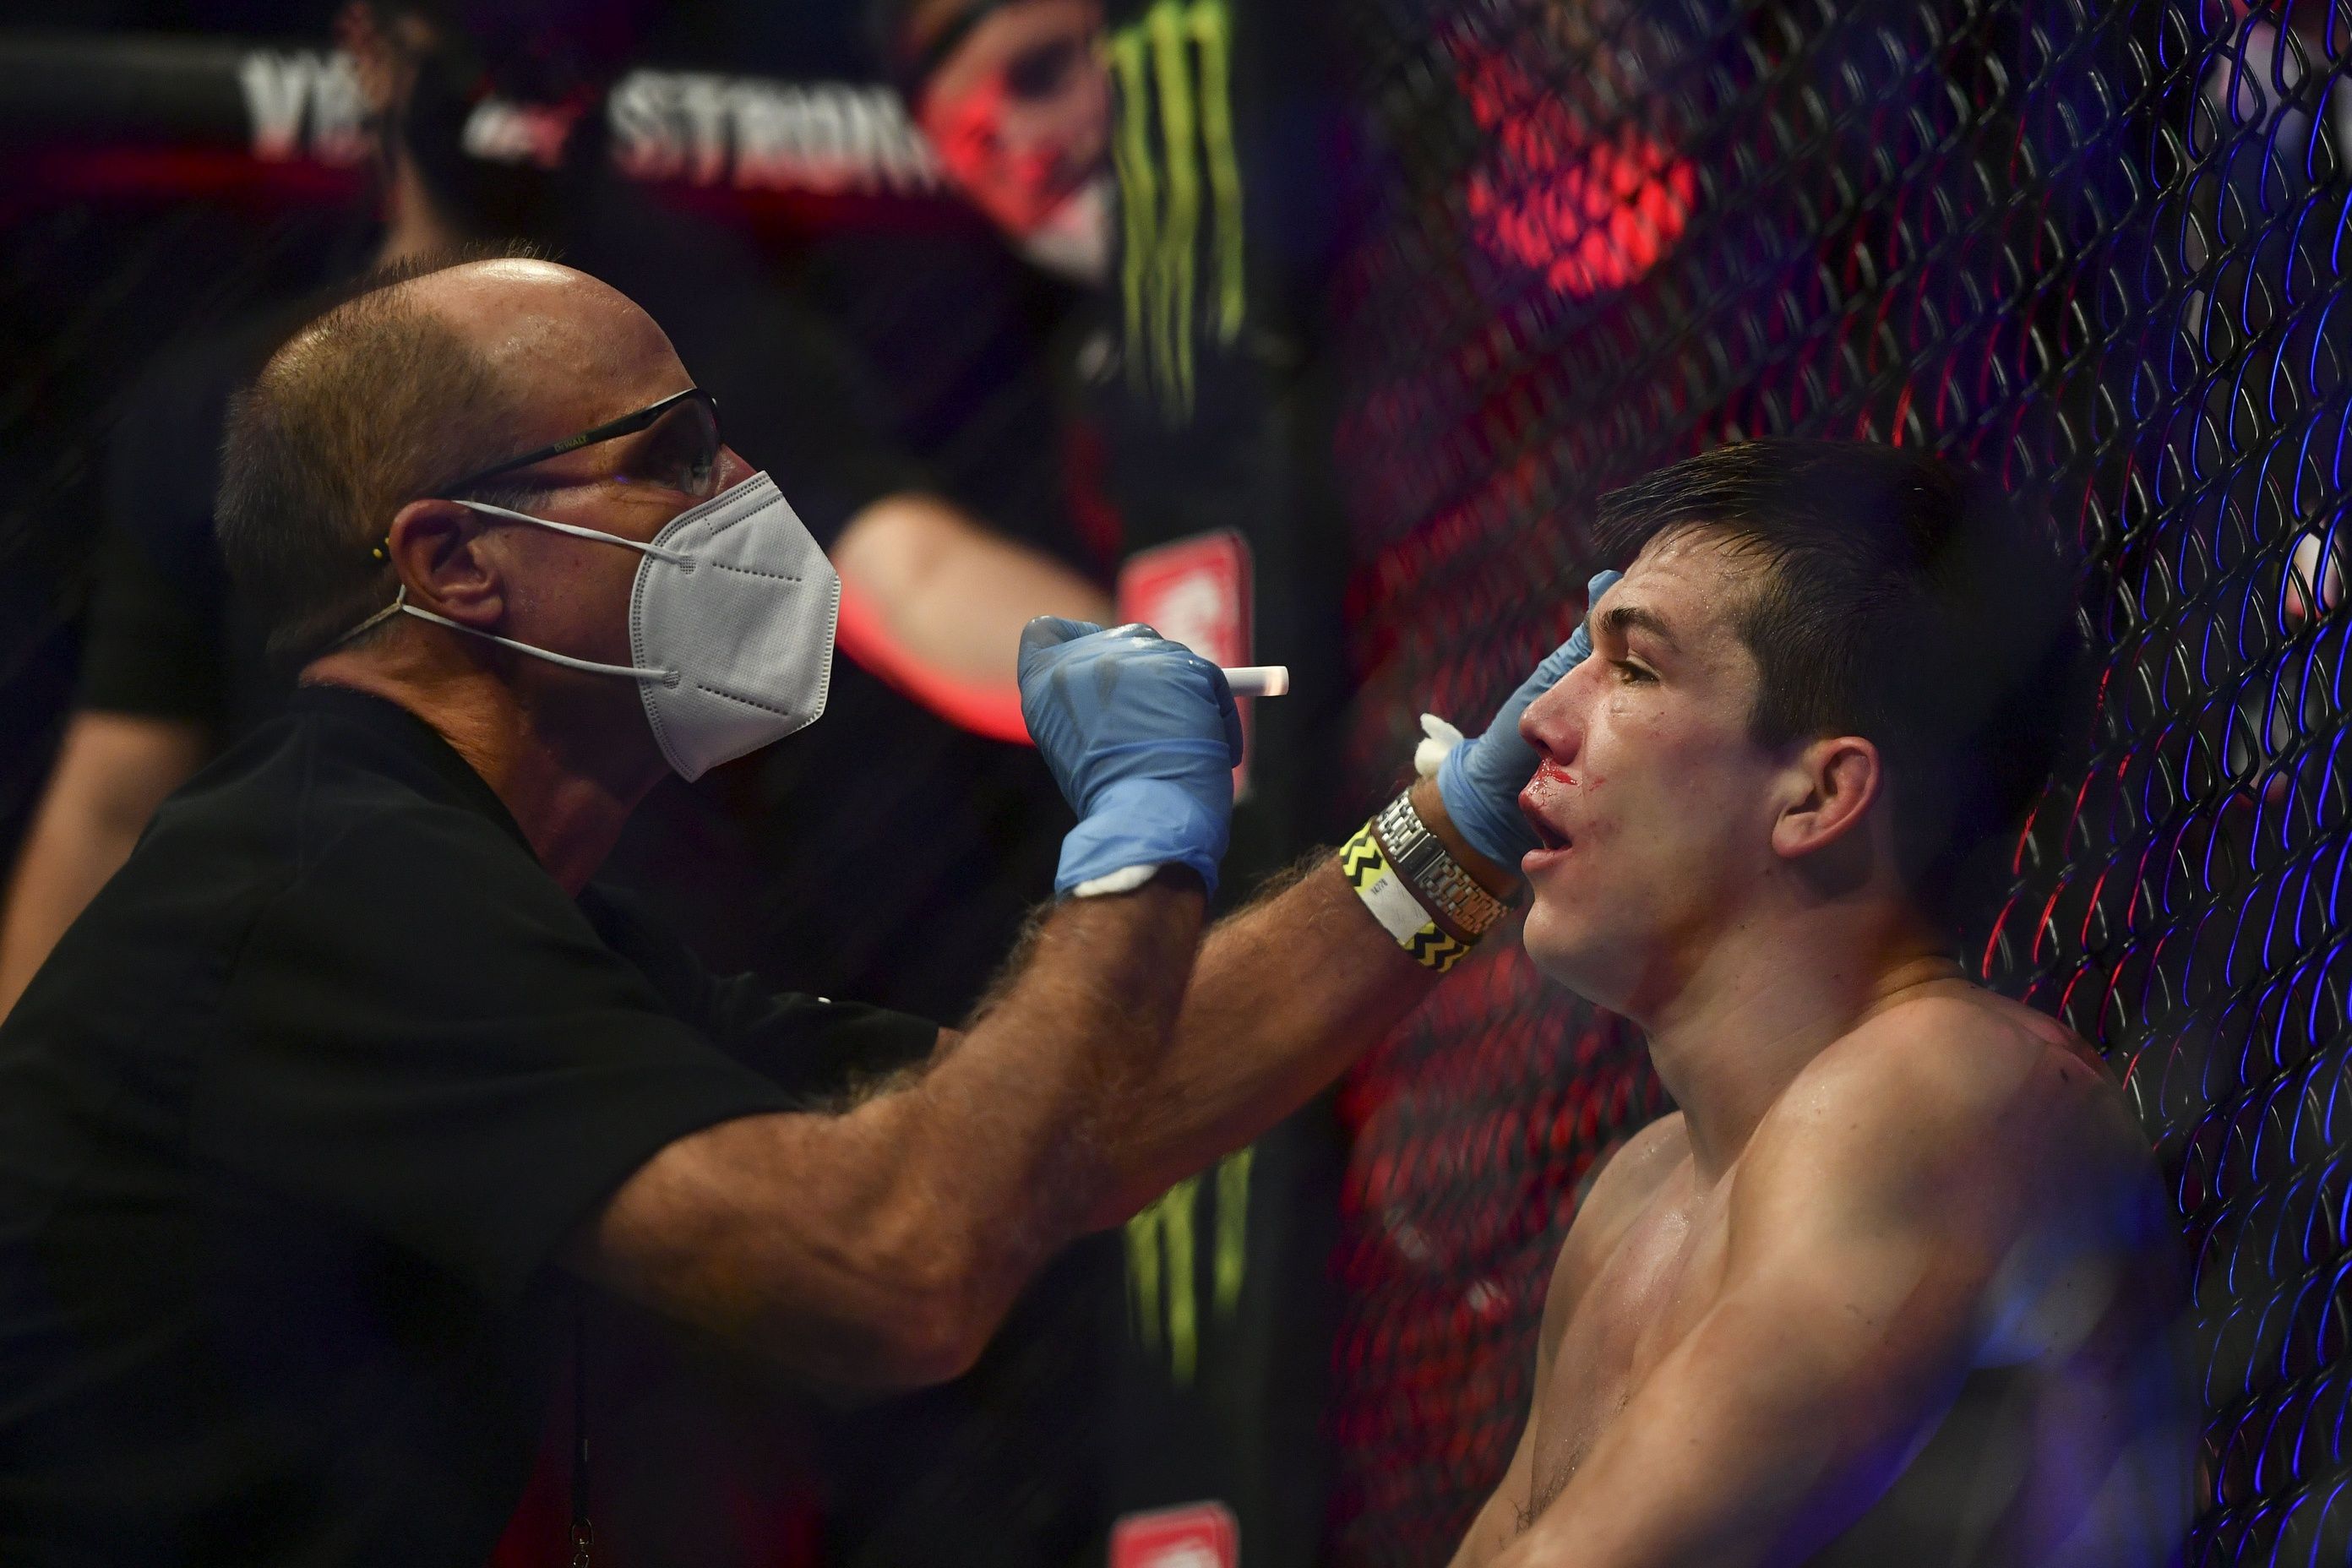 Alexander Hernandez getting checked by doctor during UFC fight